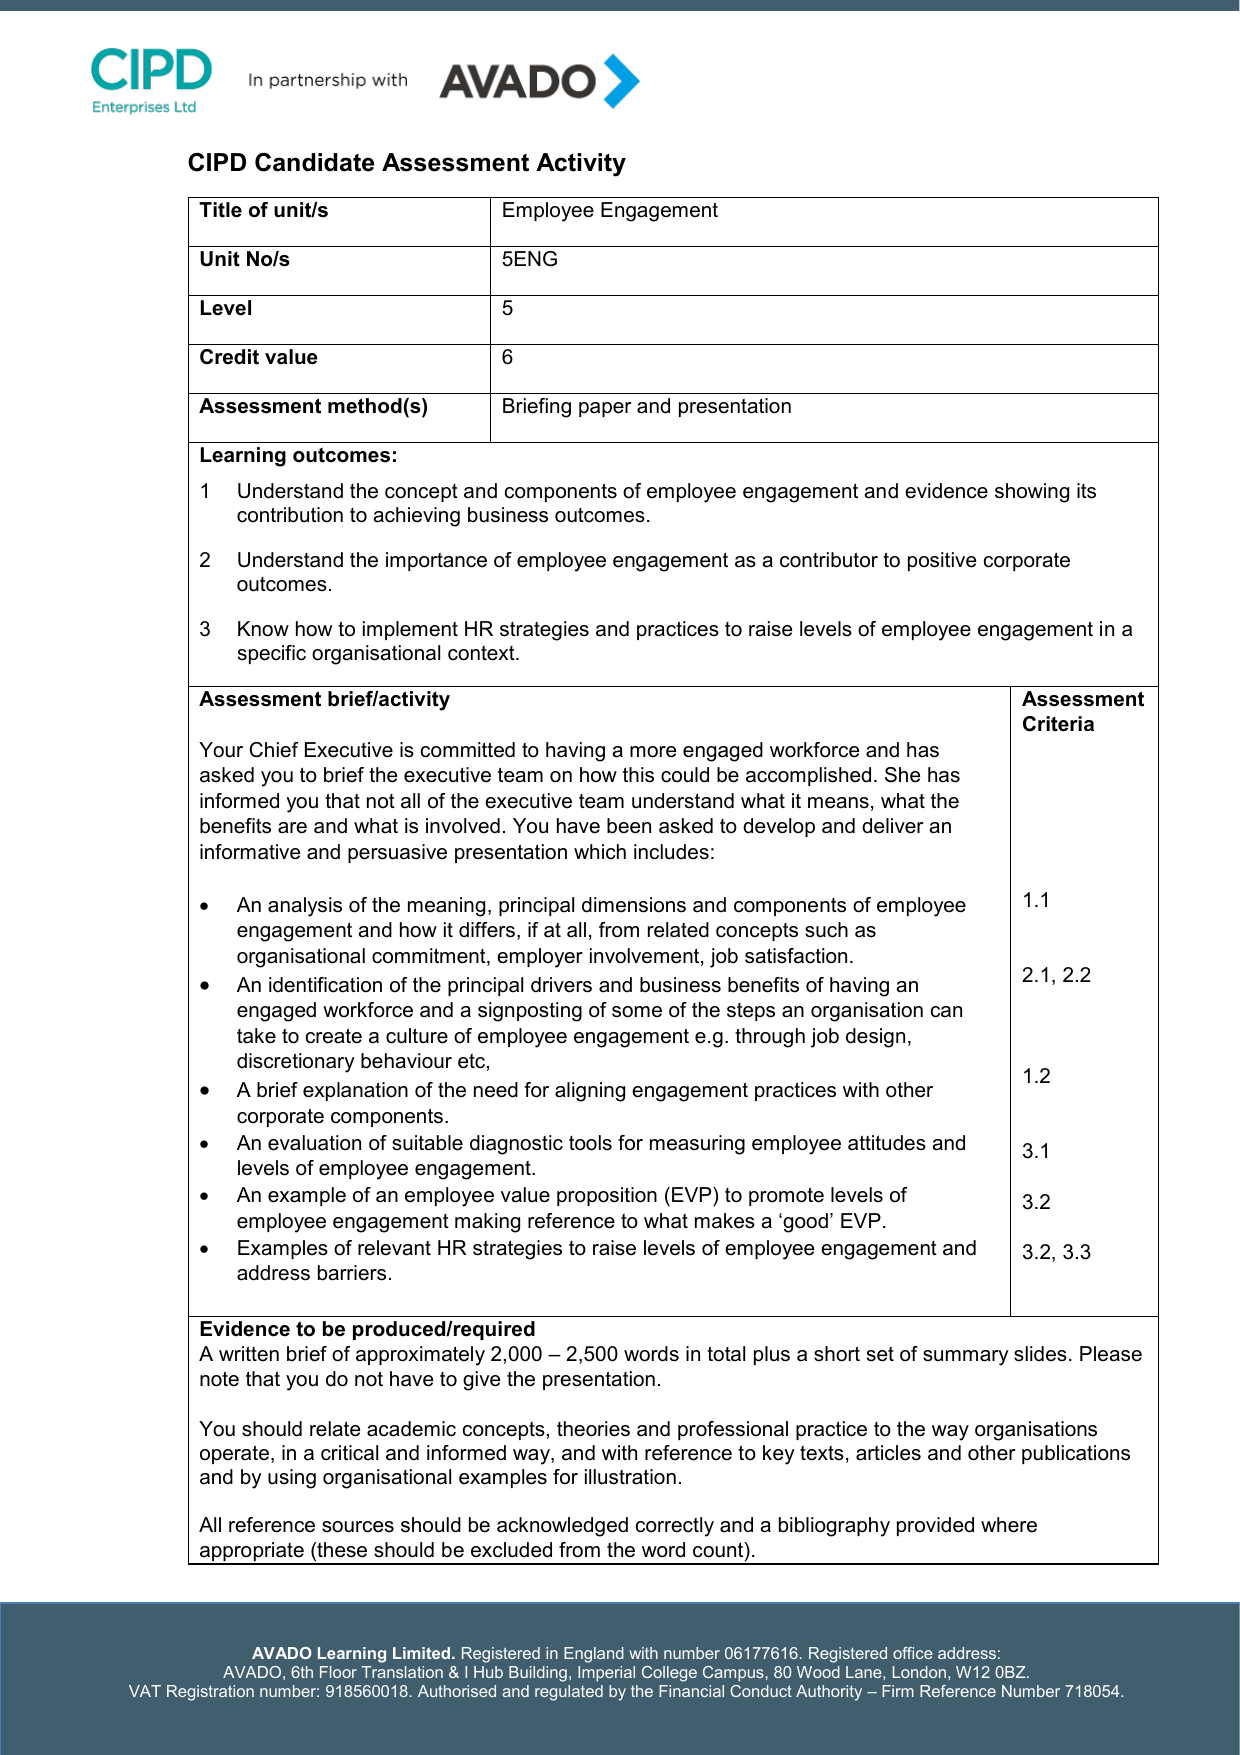 cipd level 5 assignment examples